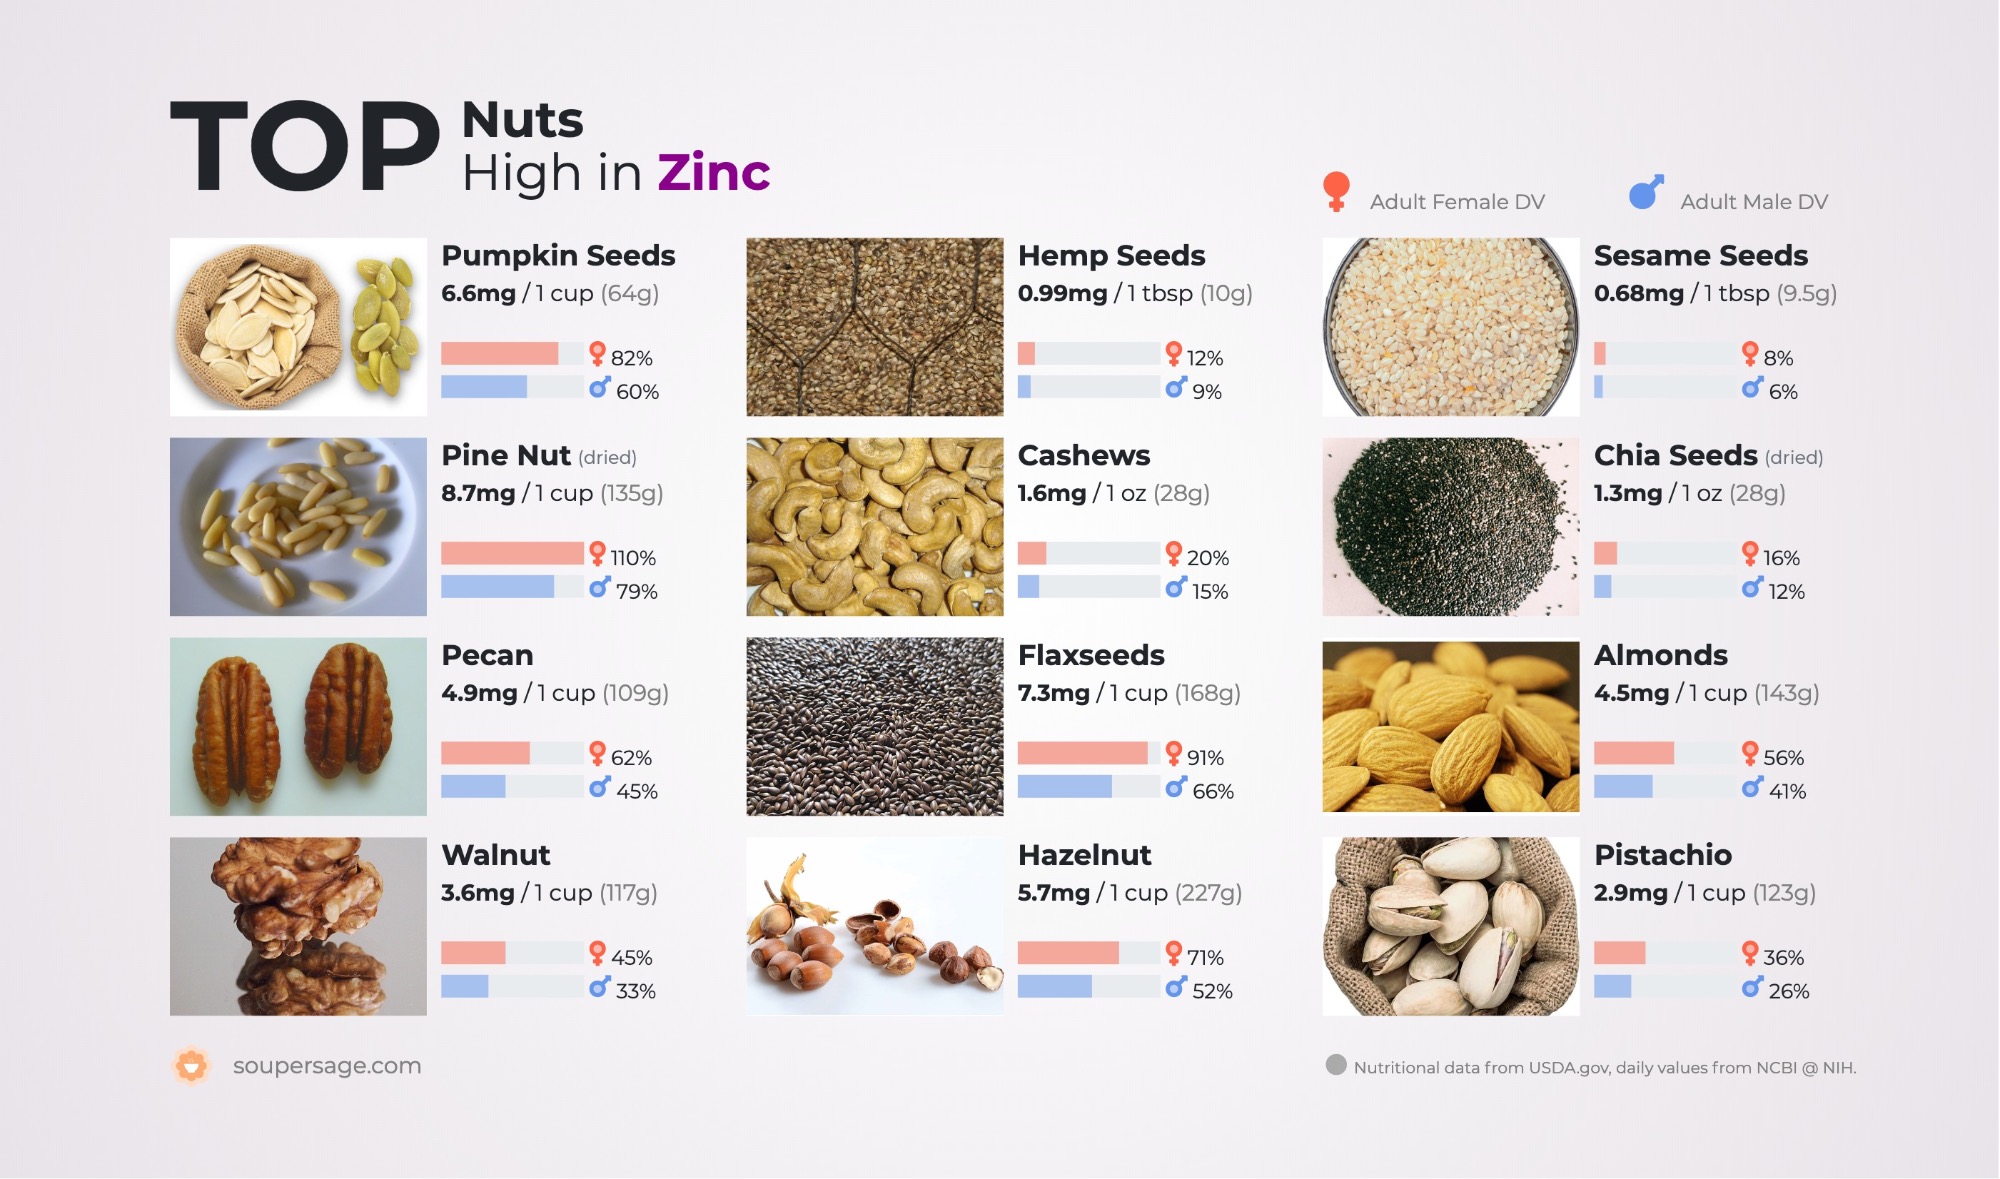 image of Top Nuts High in Zinc